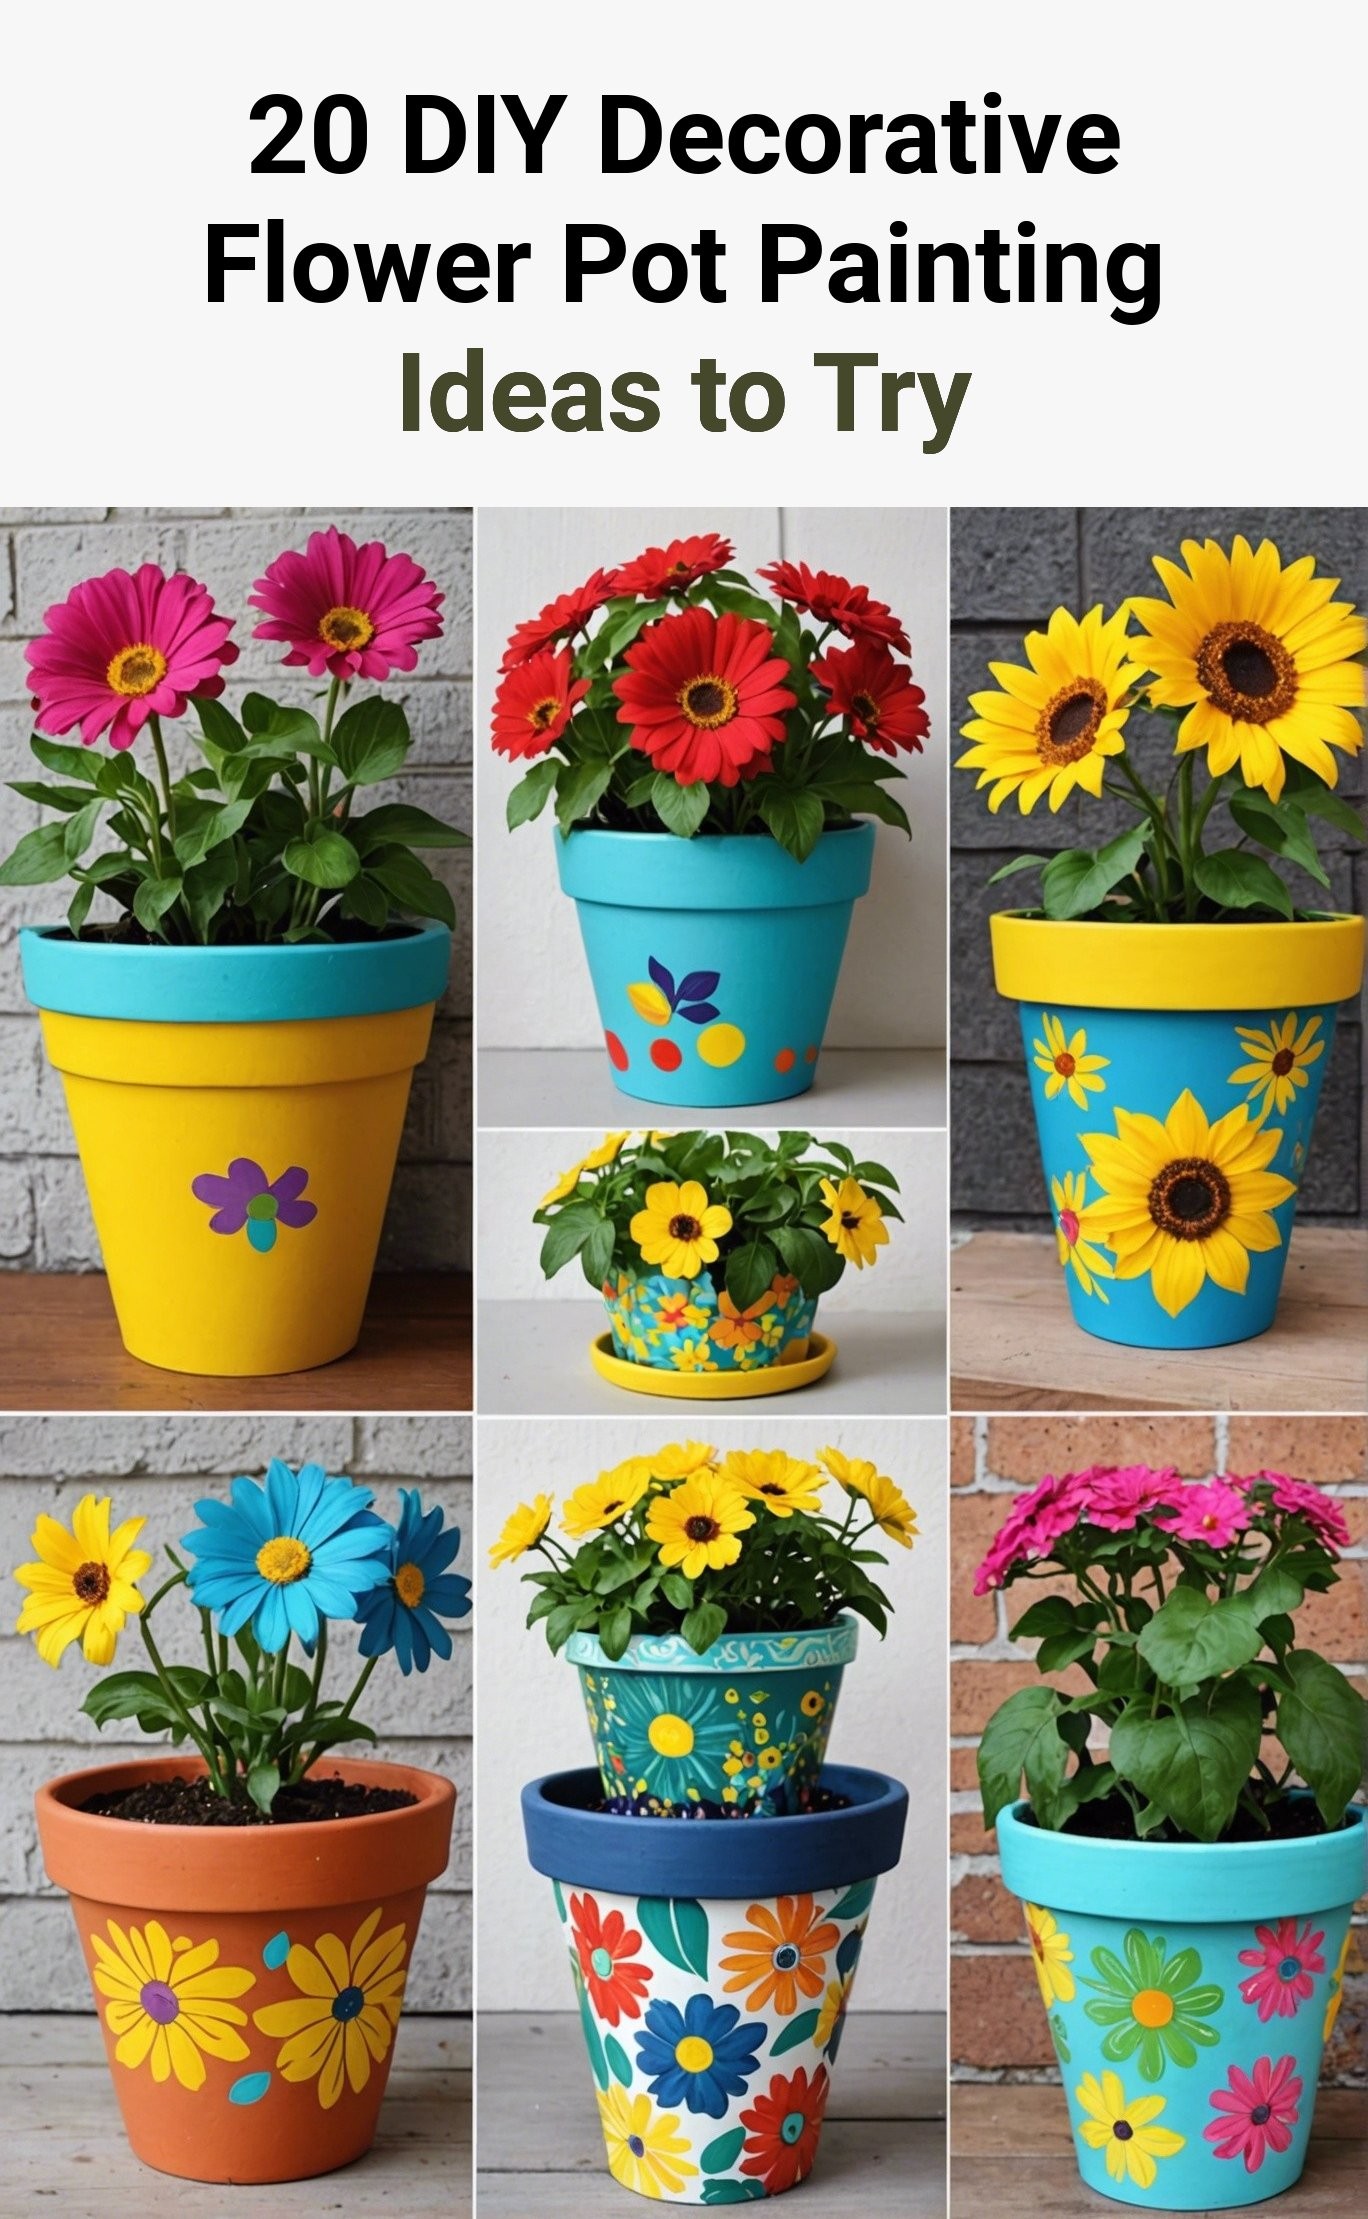 20 DIY Decorative Flower Pot Painting Ideas to Try